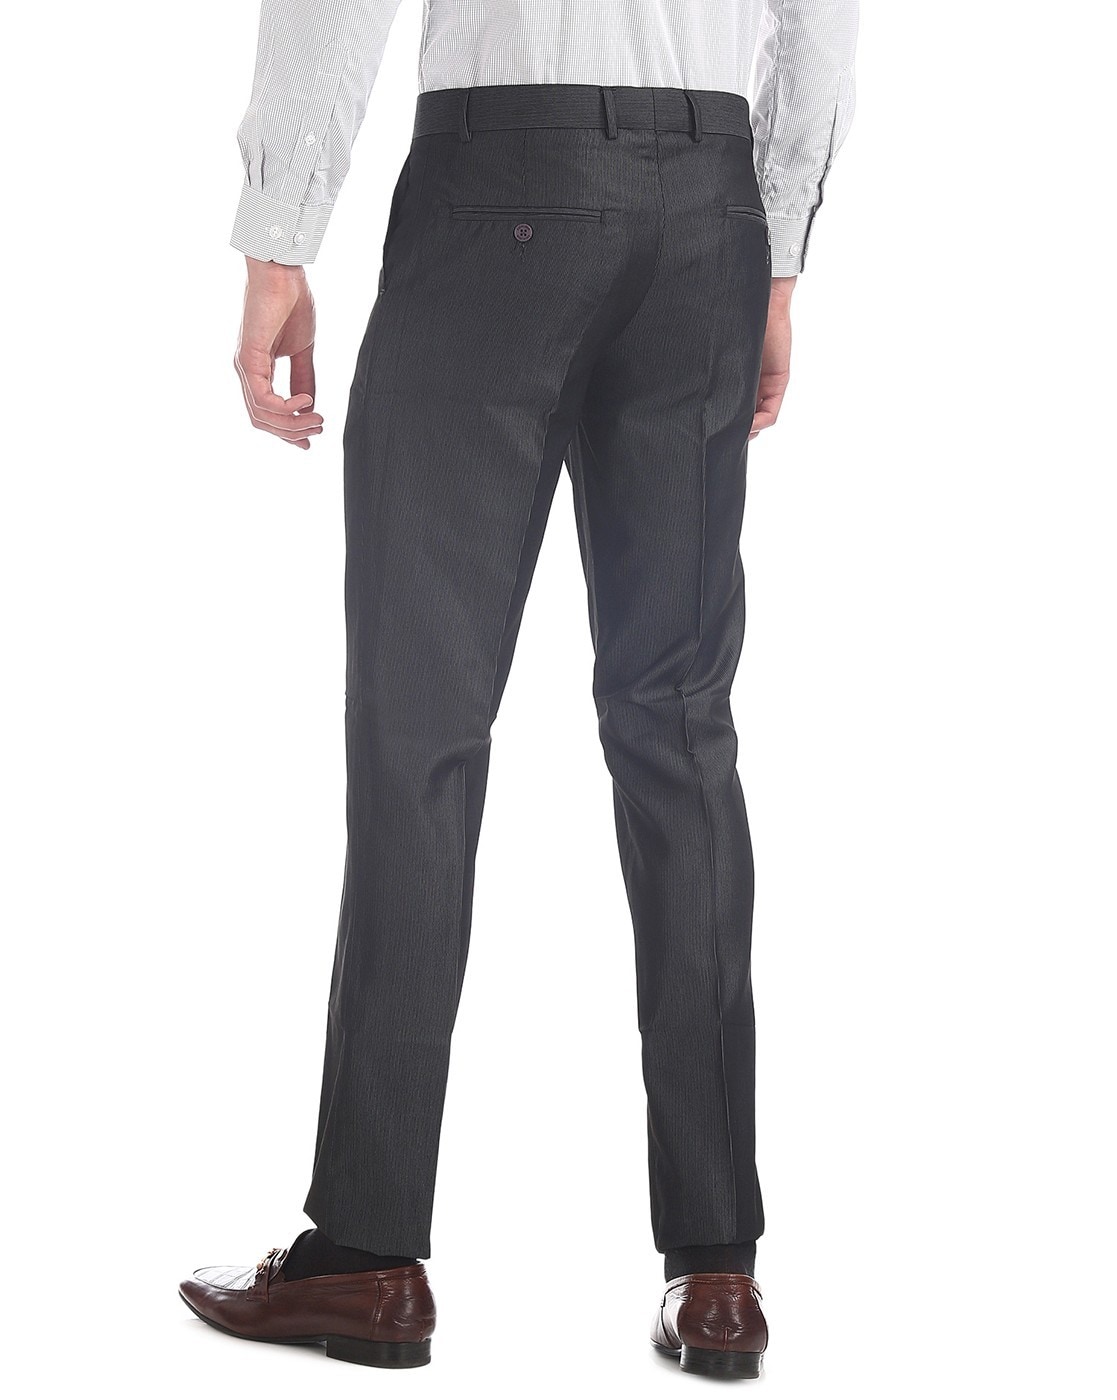 Grey Men Formal Trousers Code By Lifestyle Excalibur - Buy Grey Men Formal  Trousers Code By Lifestyle Excalibur online in India